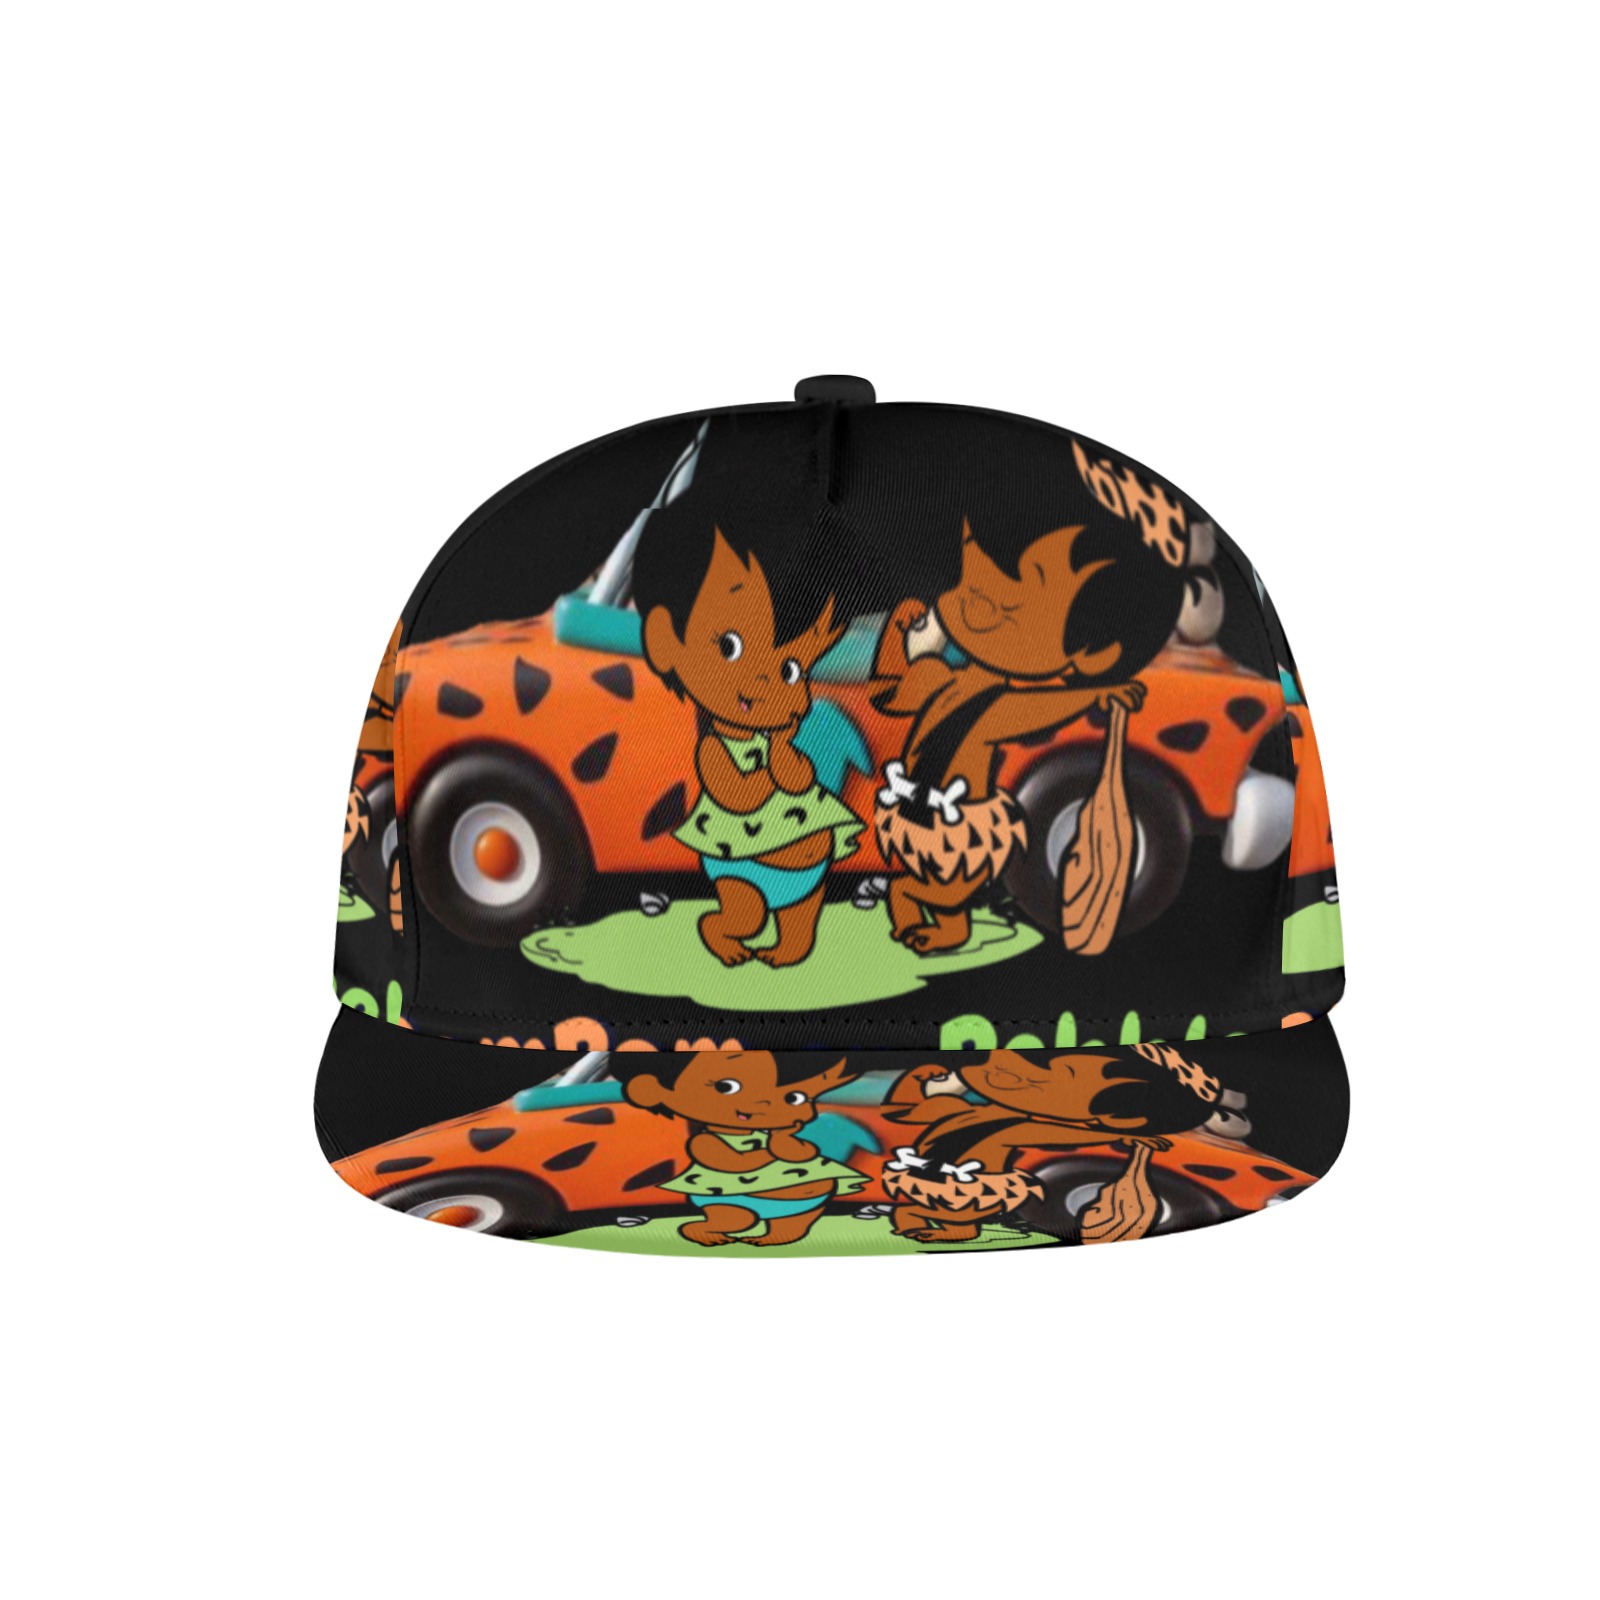 CUSTOMIZED SNAP BACK HAT All Over Print Snapback Hat